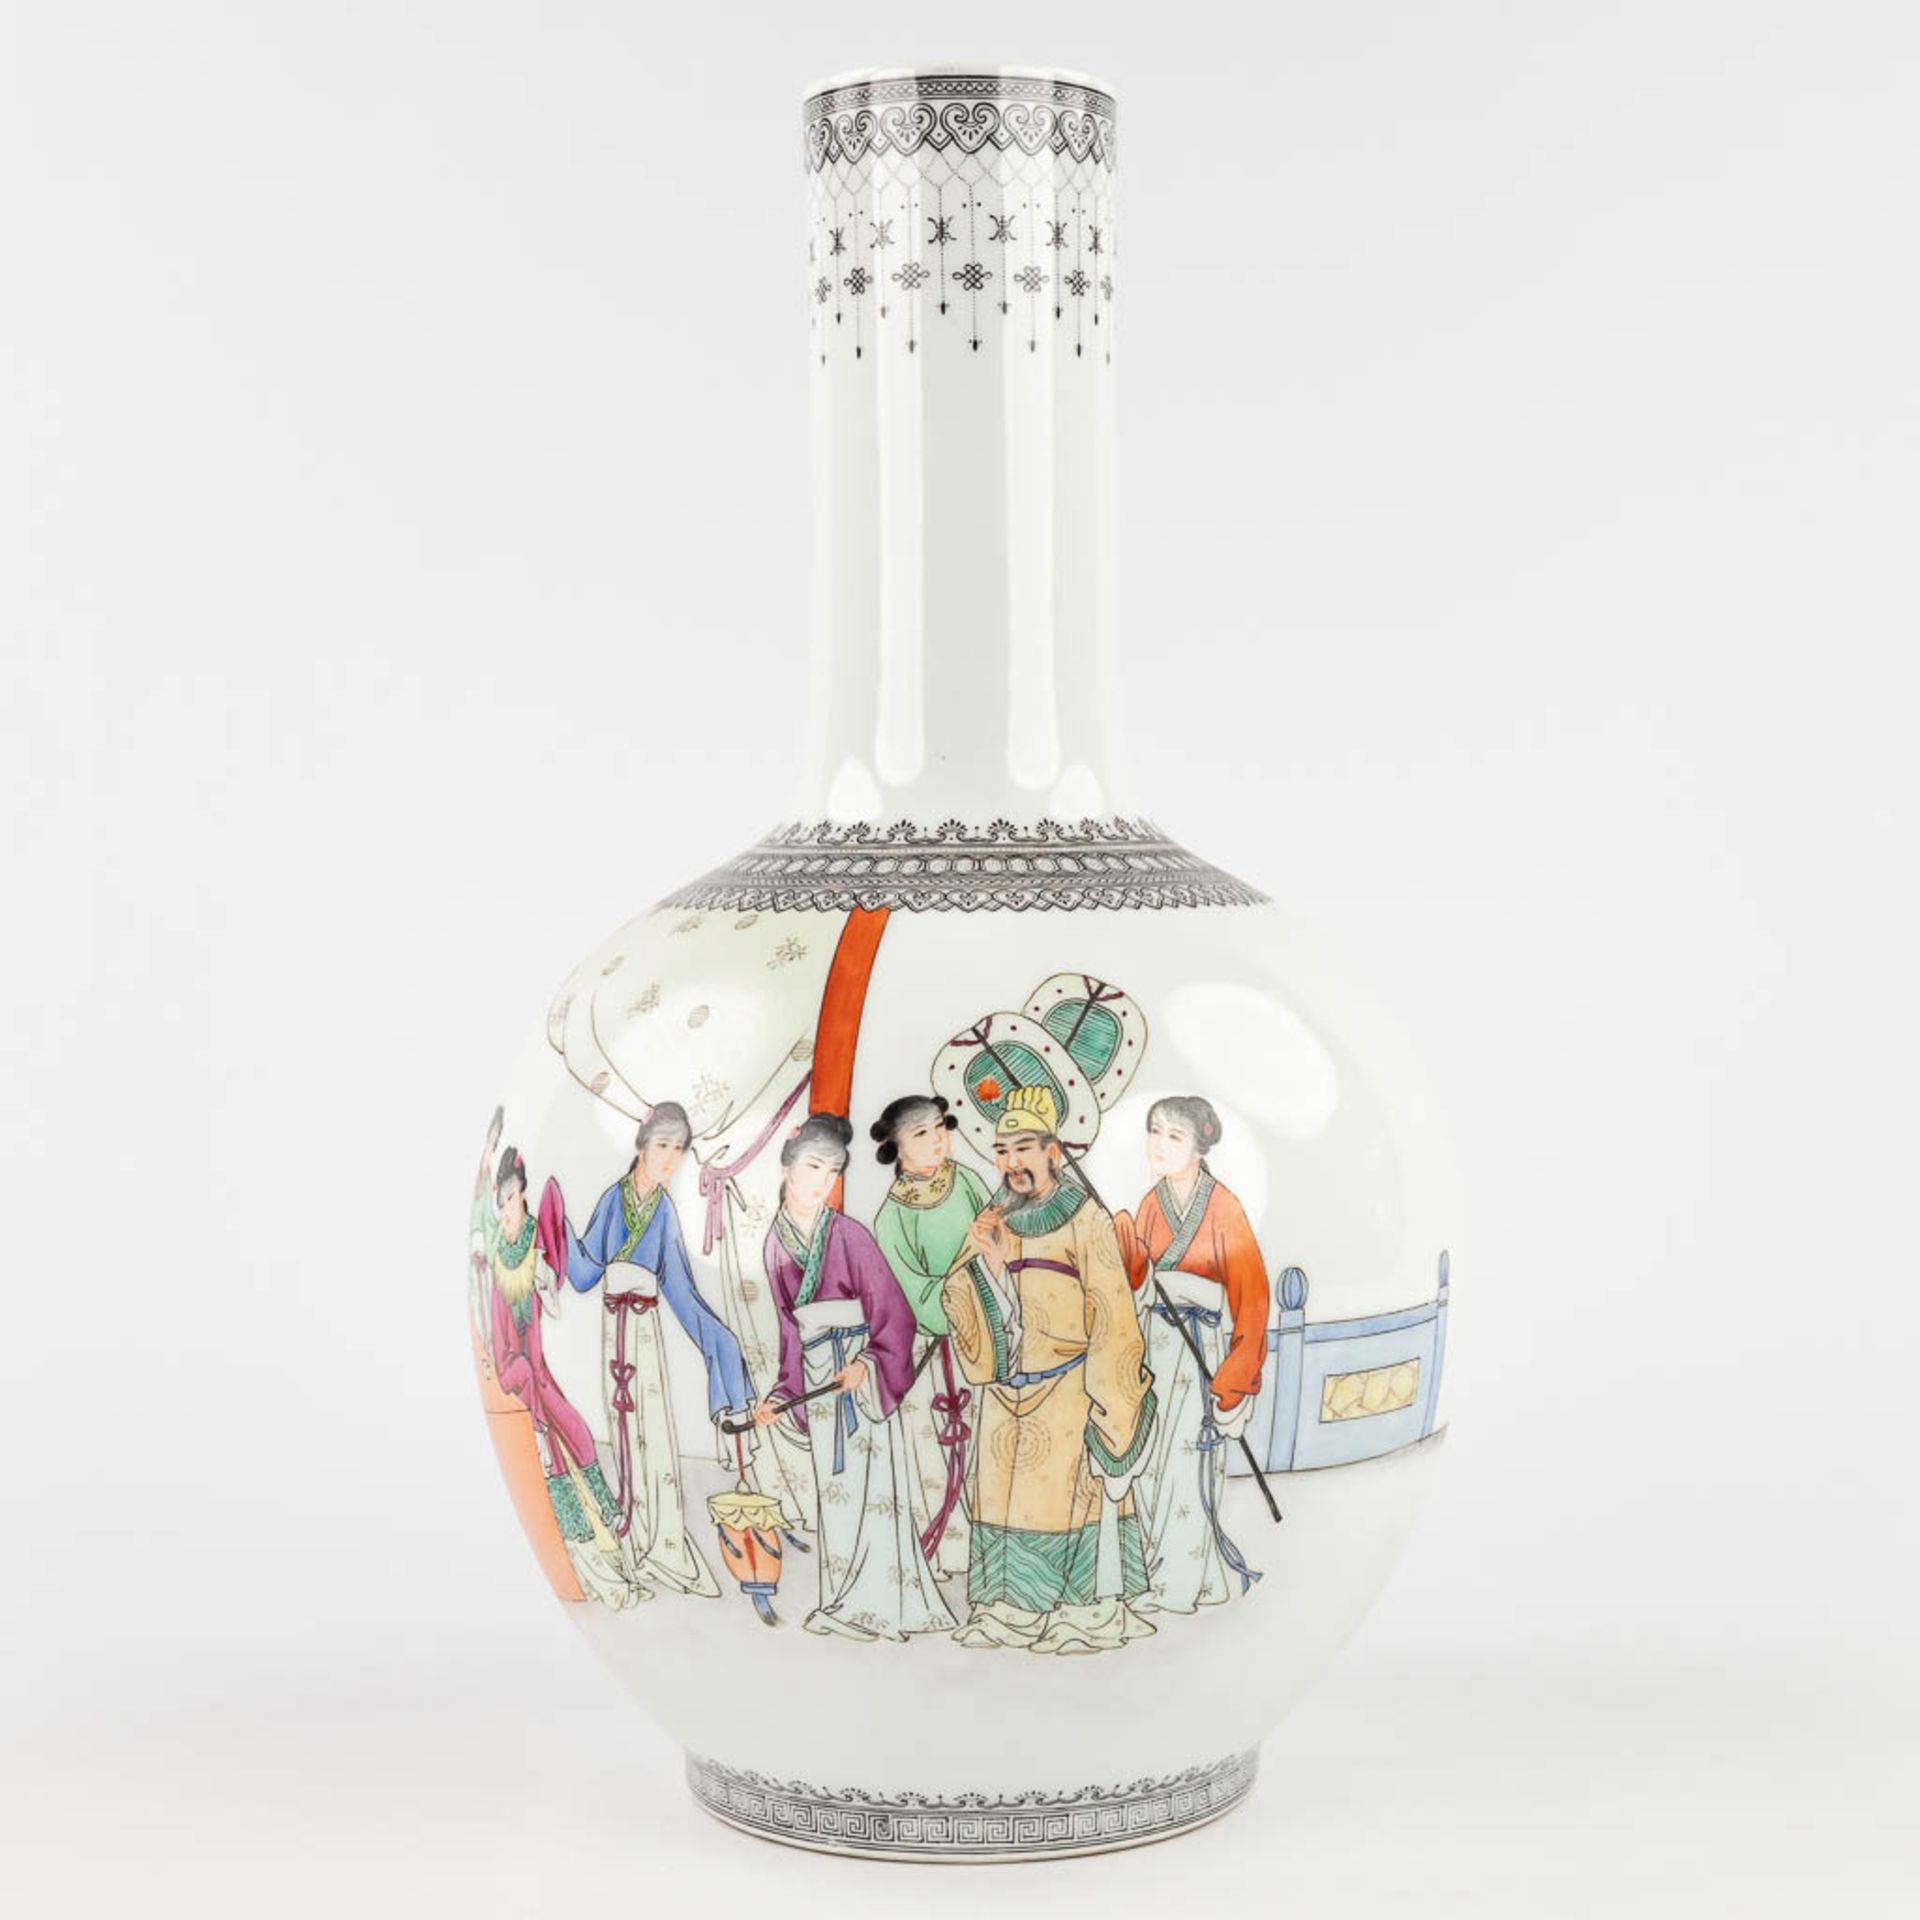 A Chinese vase with hand-painted decor of the Emperor with ladies, 20th C. (H: 40 x D: 22 cm)